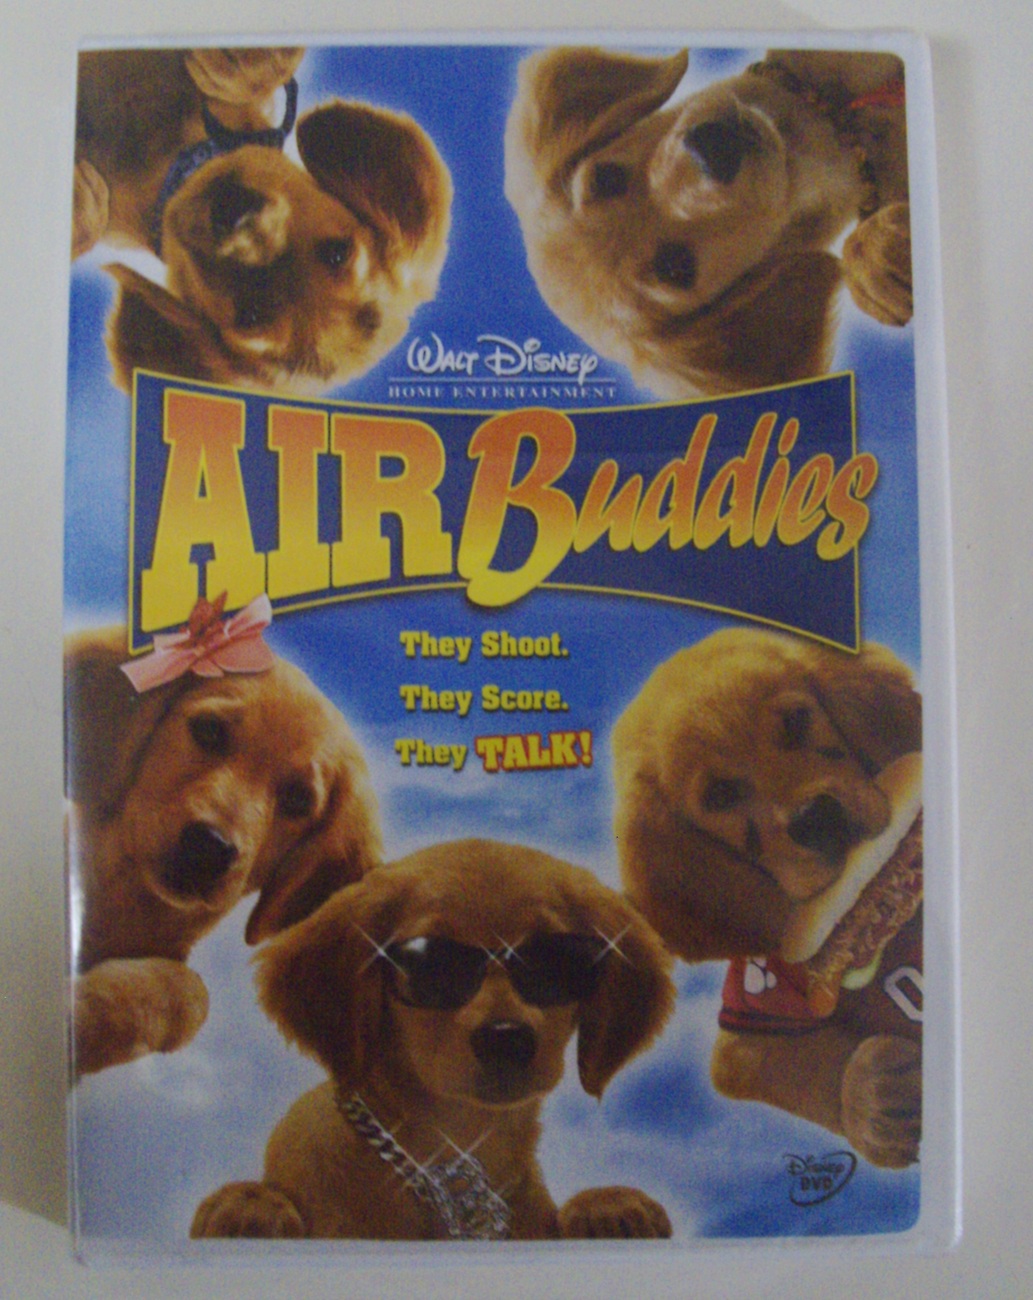 Primary image for Walt Disney Home Entertainment Air Buddies Film on DVD - New